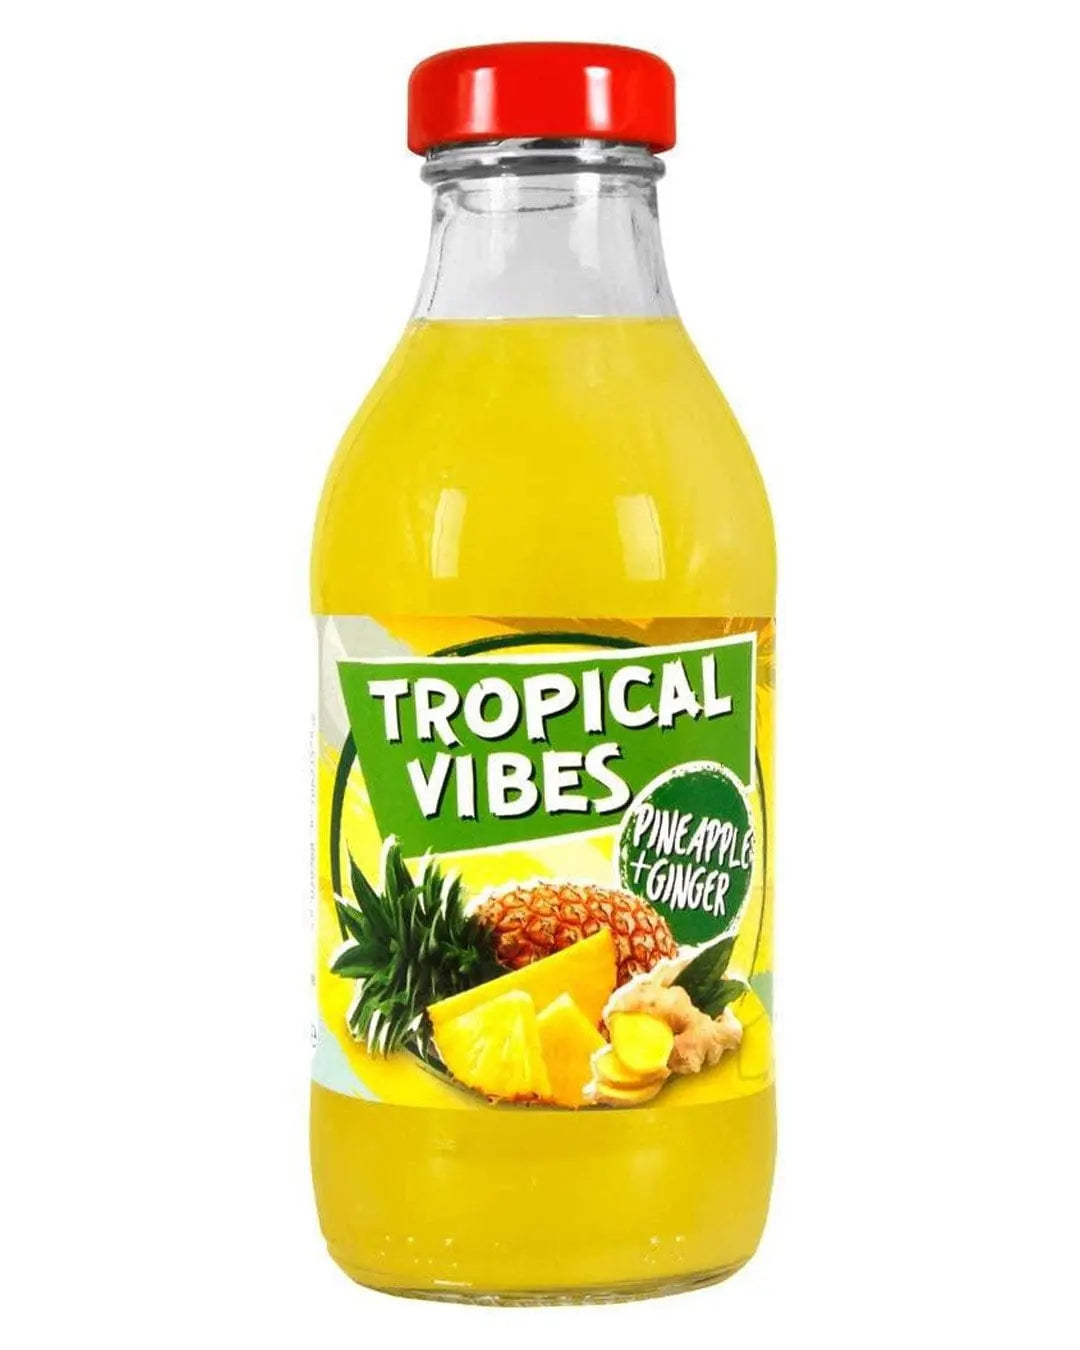 Tropical Vibes Pineapple & Ginger Drink Multipack, 15 x 300 ml Soft Drinks & Mixers